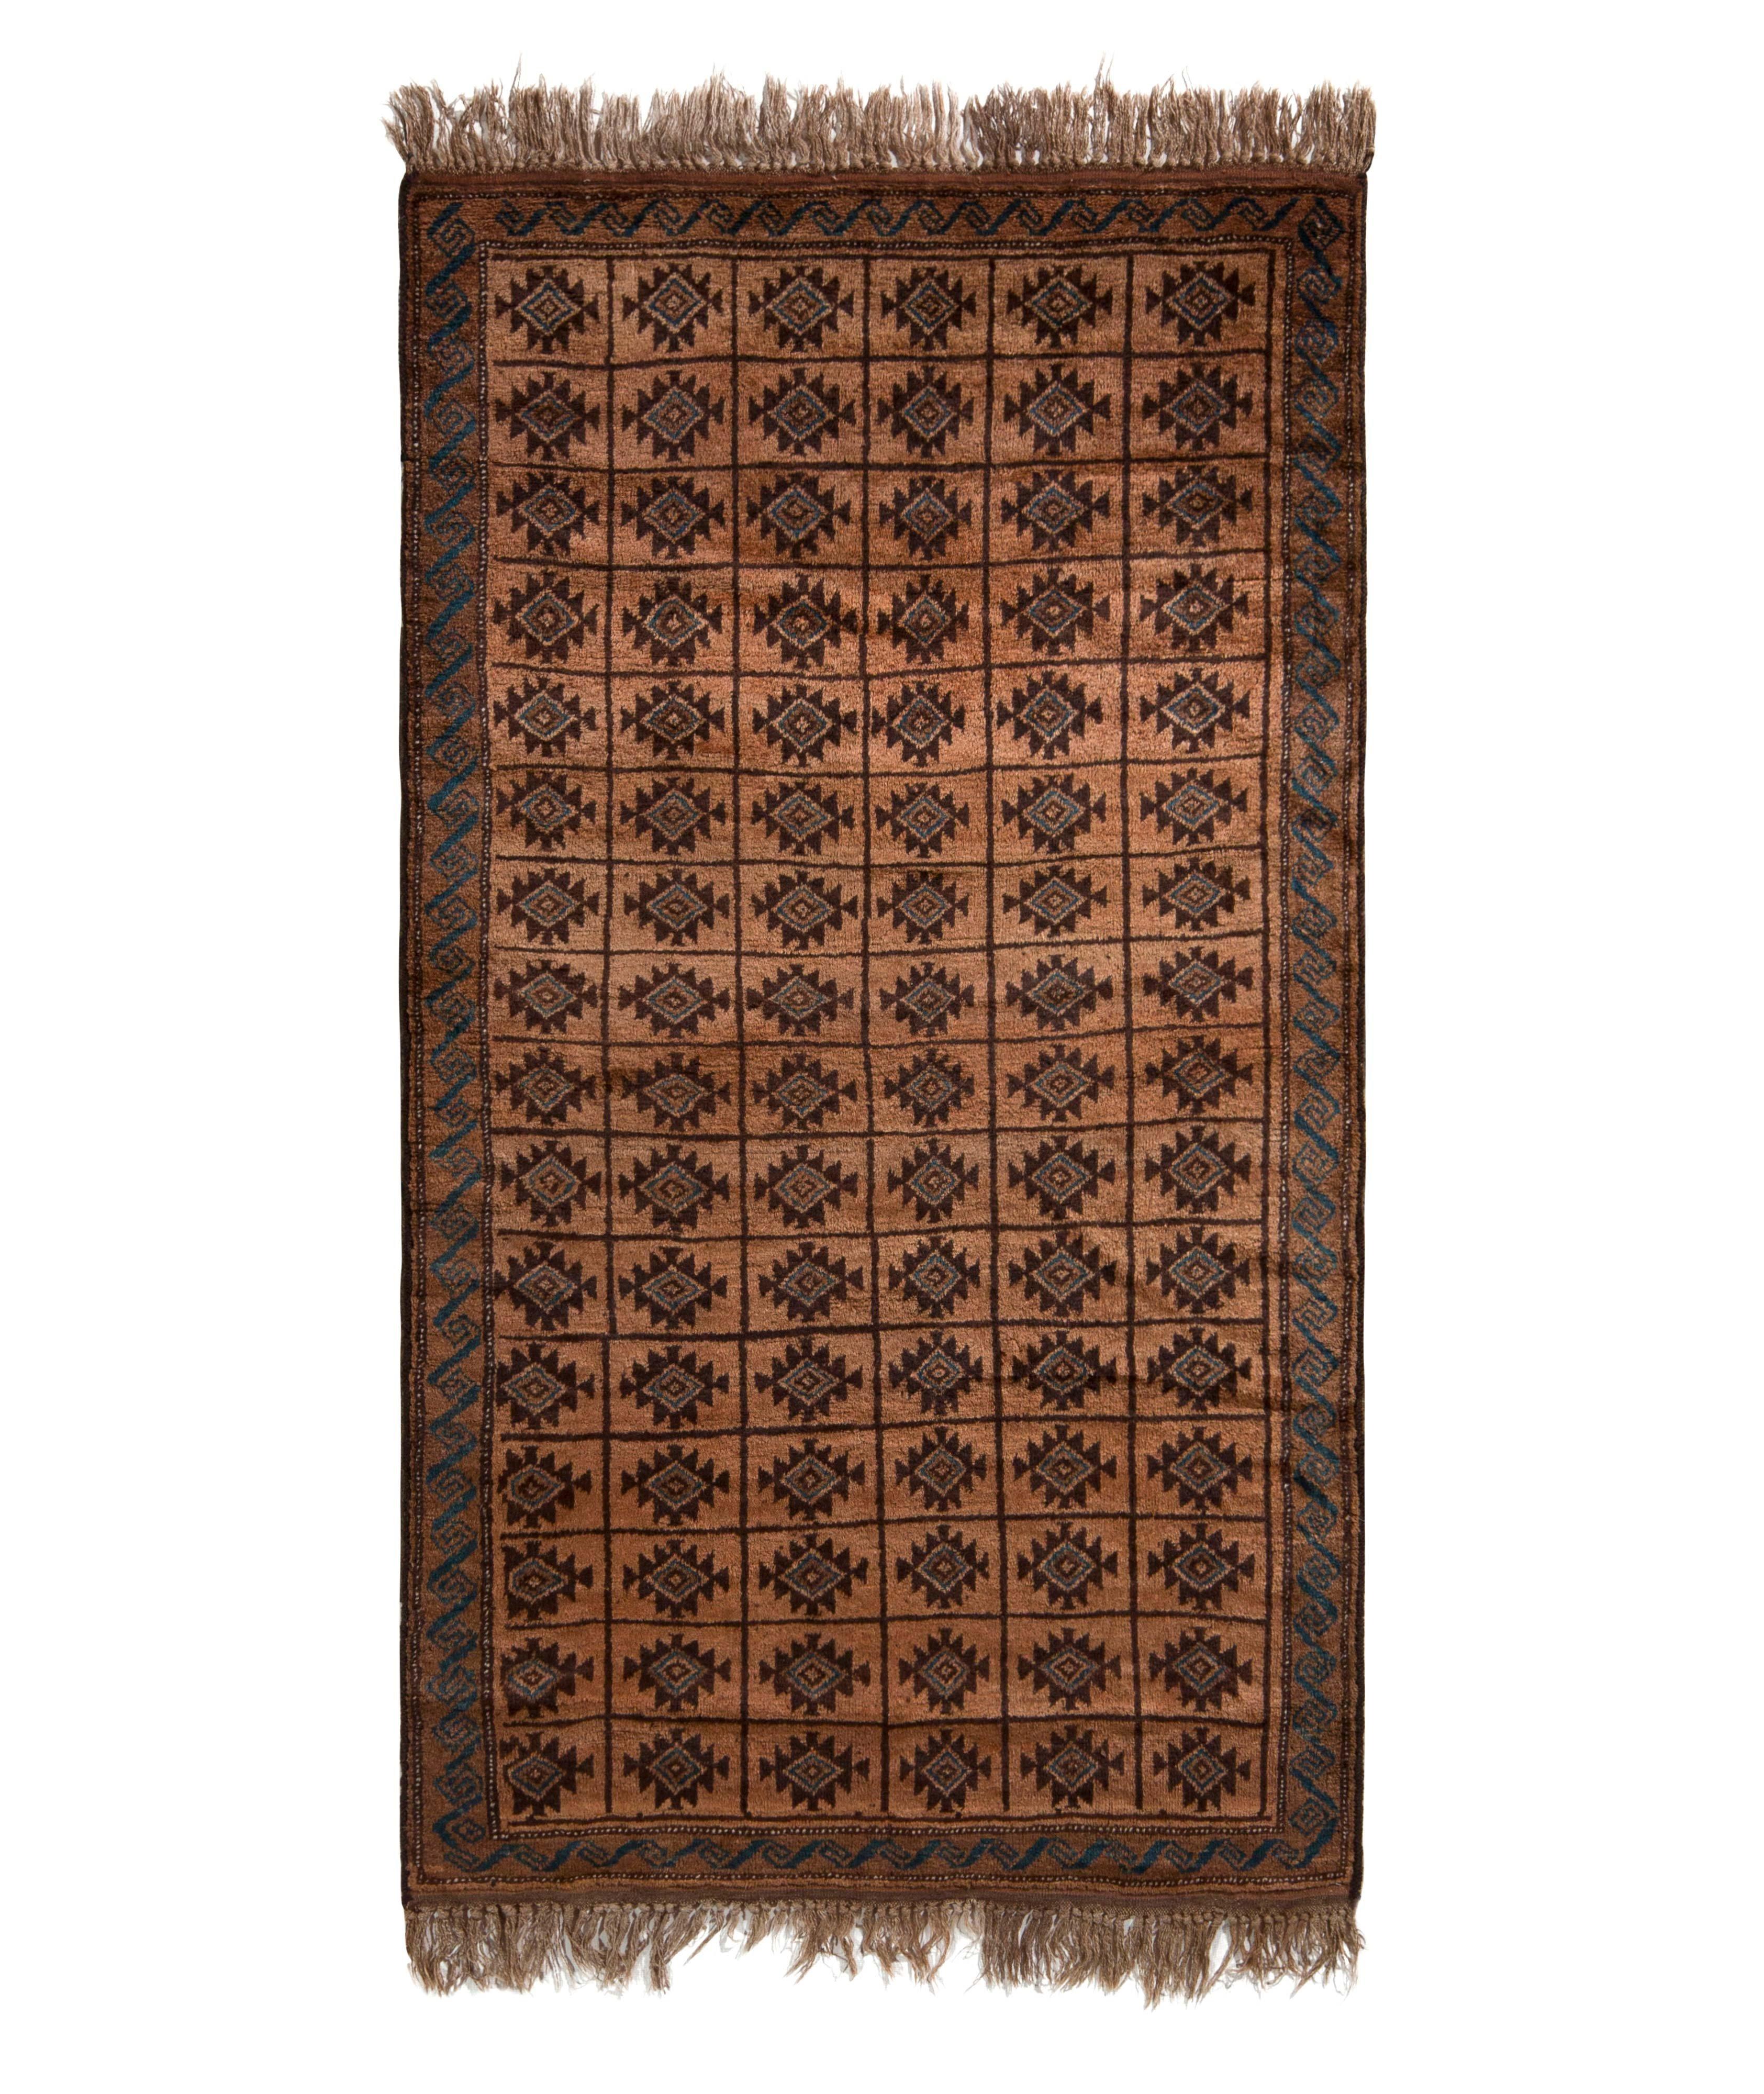 Hand-Knotted Antique Baluch Geometric Tribal Pattern Rug